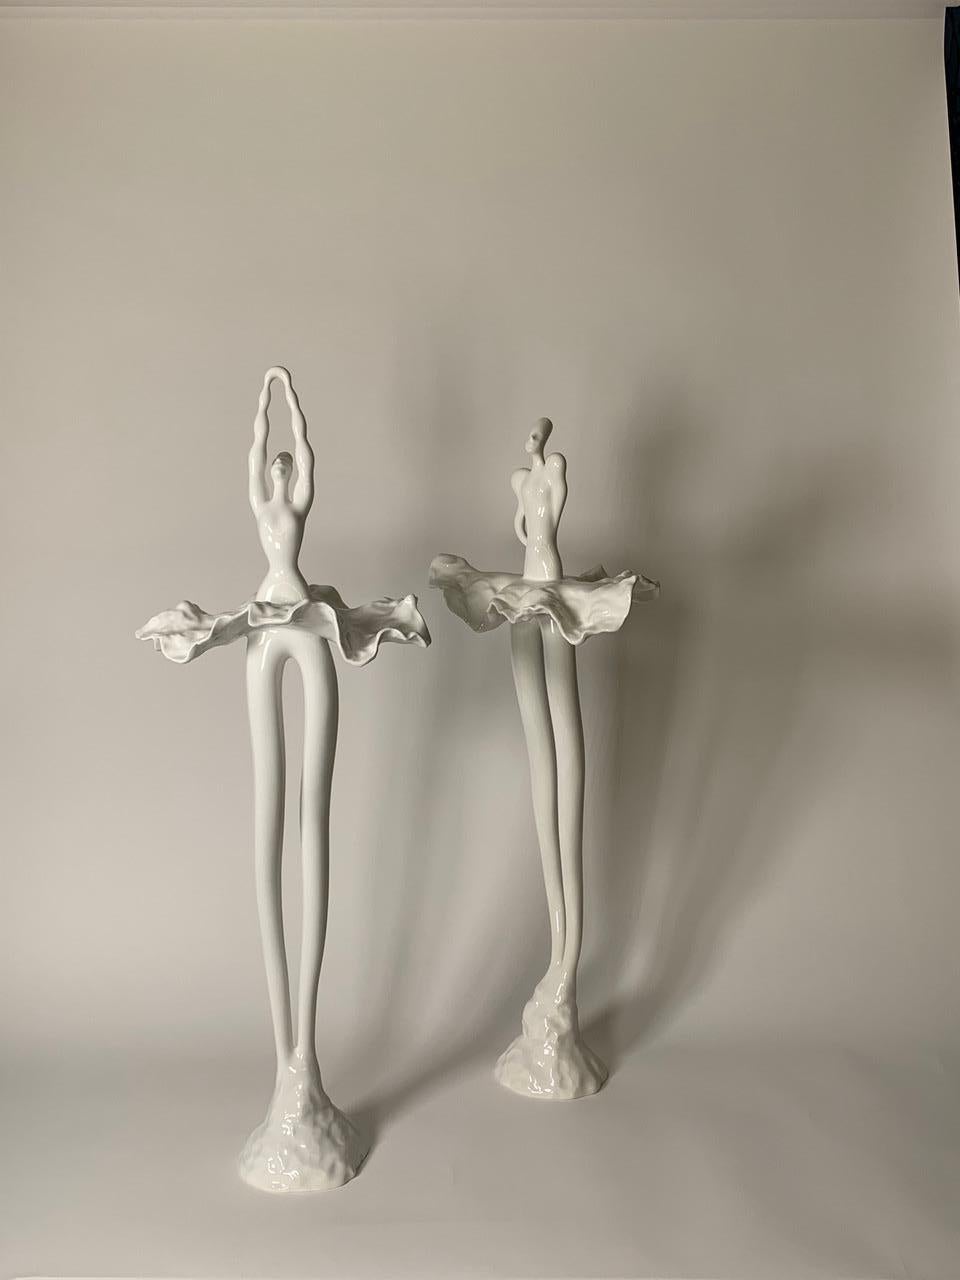 Ceramic Sculpture Maria A and Maria B Model by Bertozzi & Casoni for Imolarte In Excellent Condition For Sale In Milan, Italy